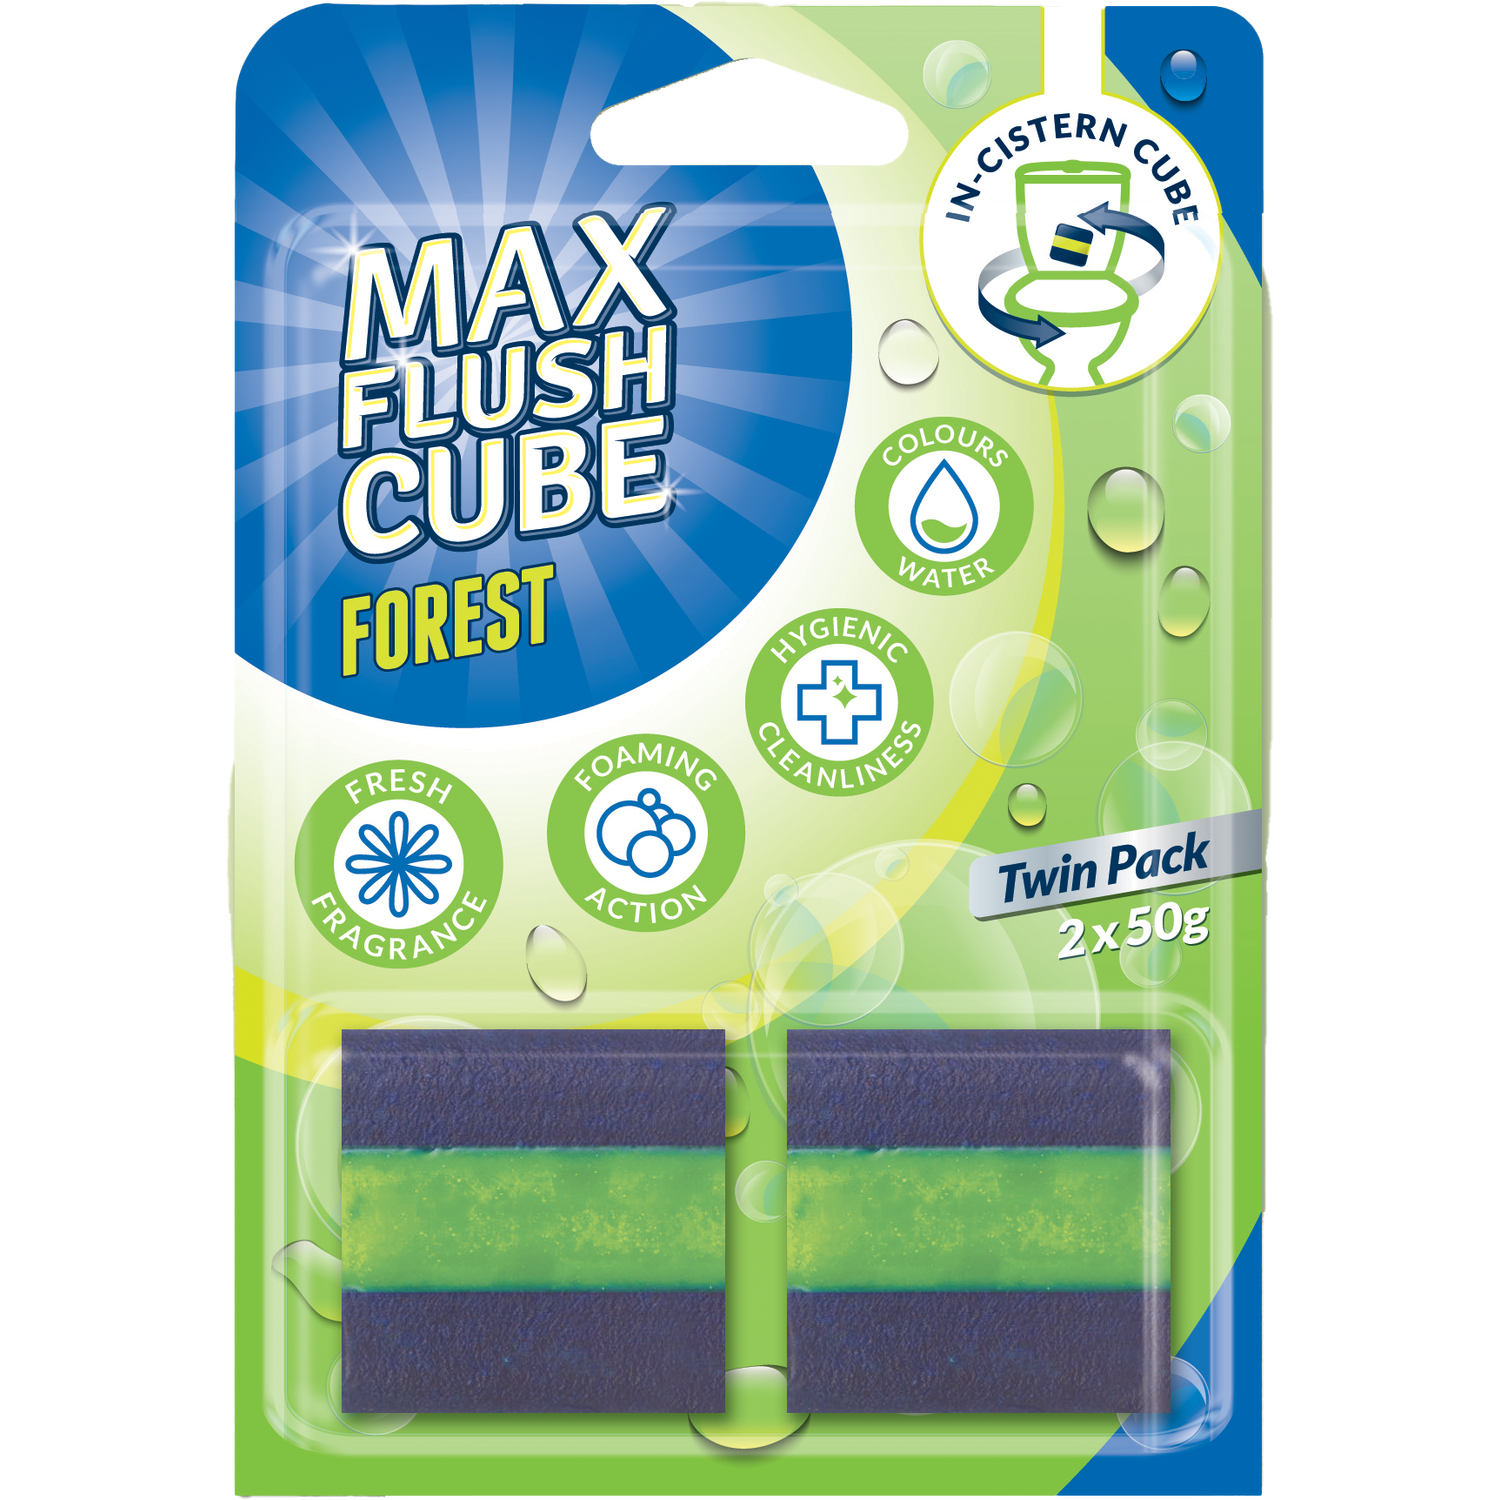 Max Flush Cube Twin Pack - Forest Image 1